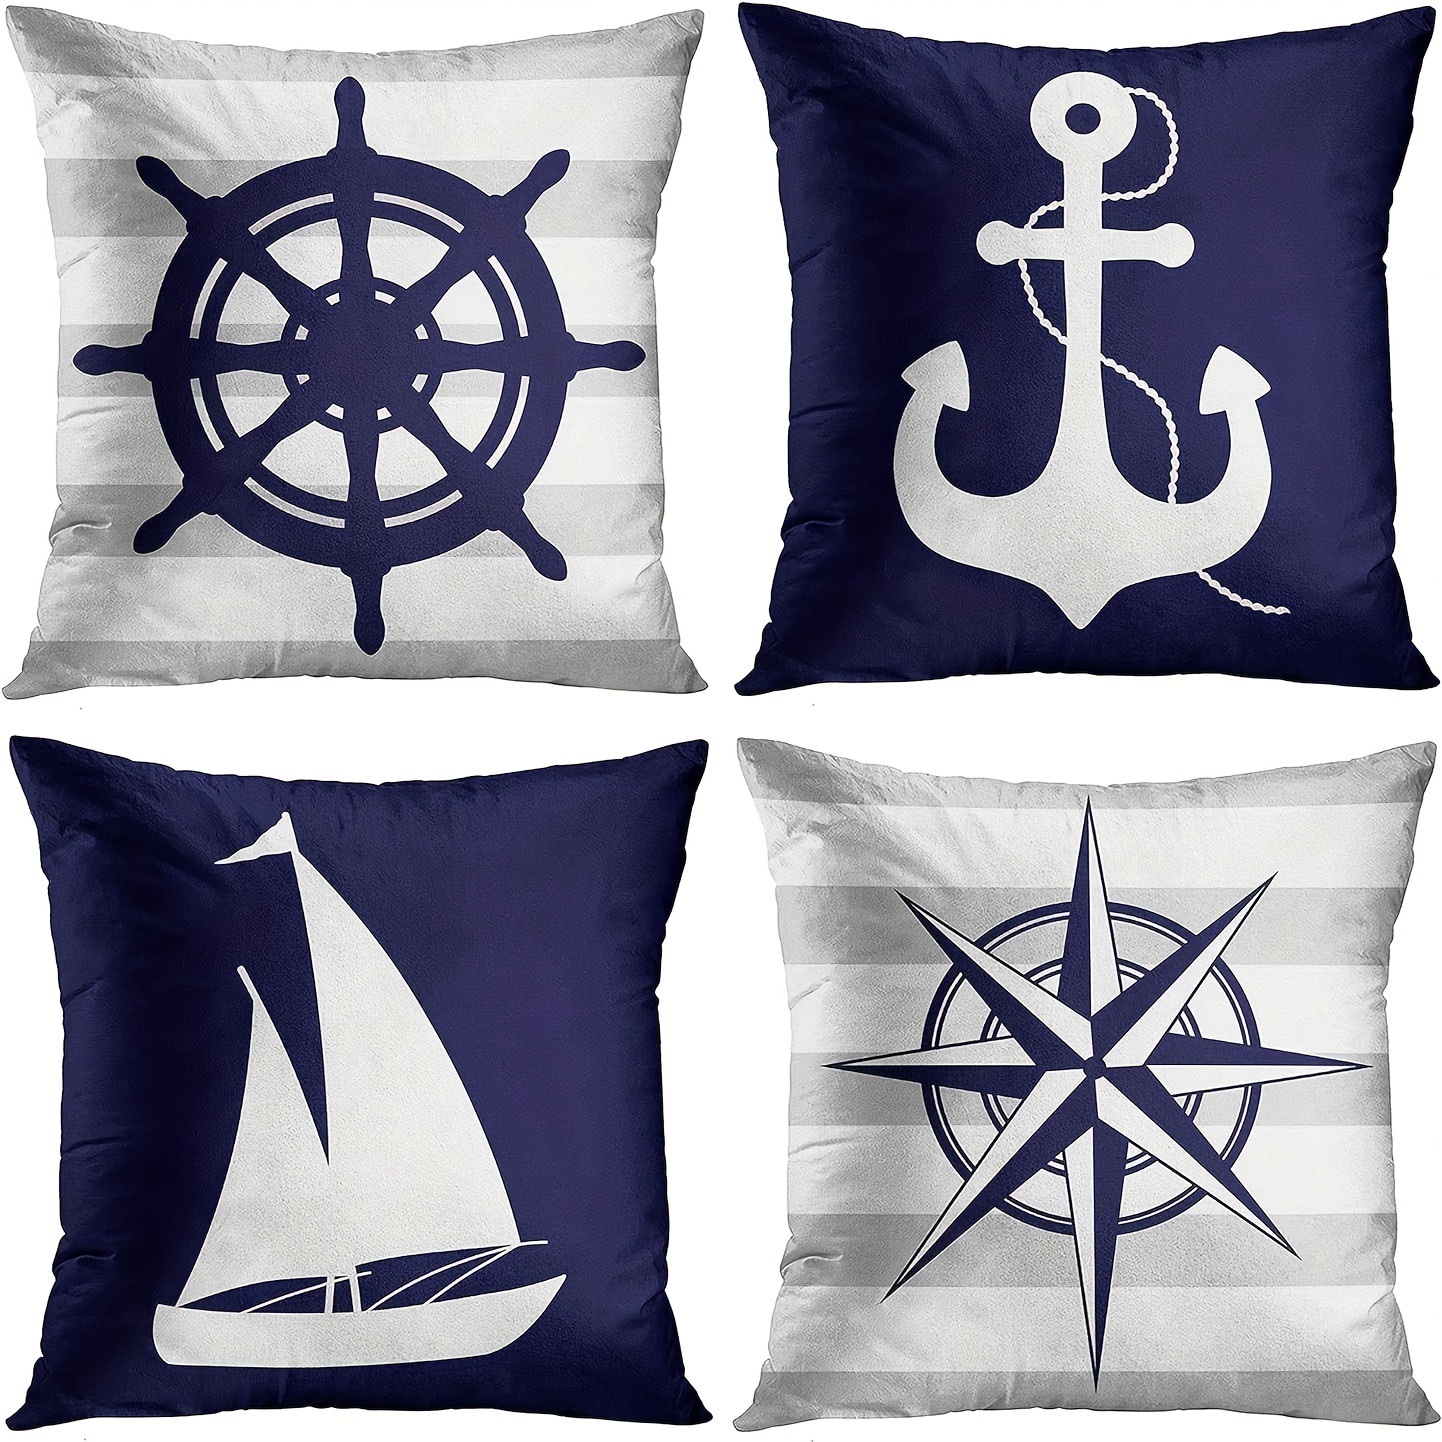 

4pcs, Throw Pillow Covers Summer Costal Navy Blue White And Gray Stripe Helm Anchor Boat Star Decorative Pillow Cases Home Decor Standard Square 18x18 Inches Pillowcases